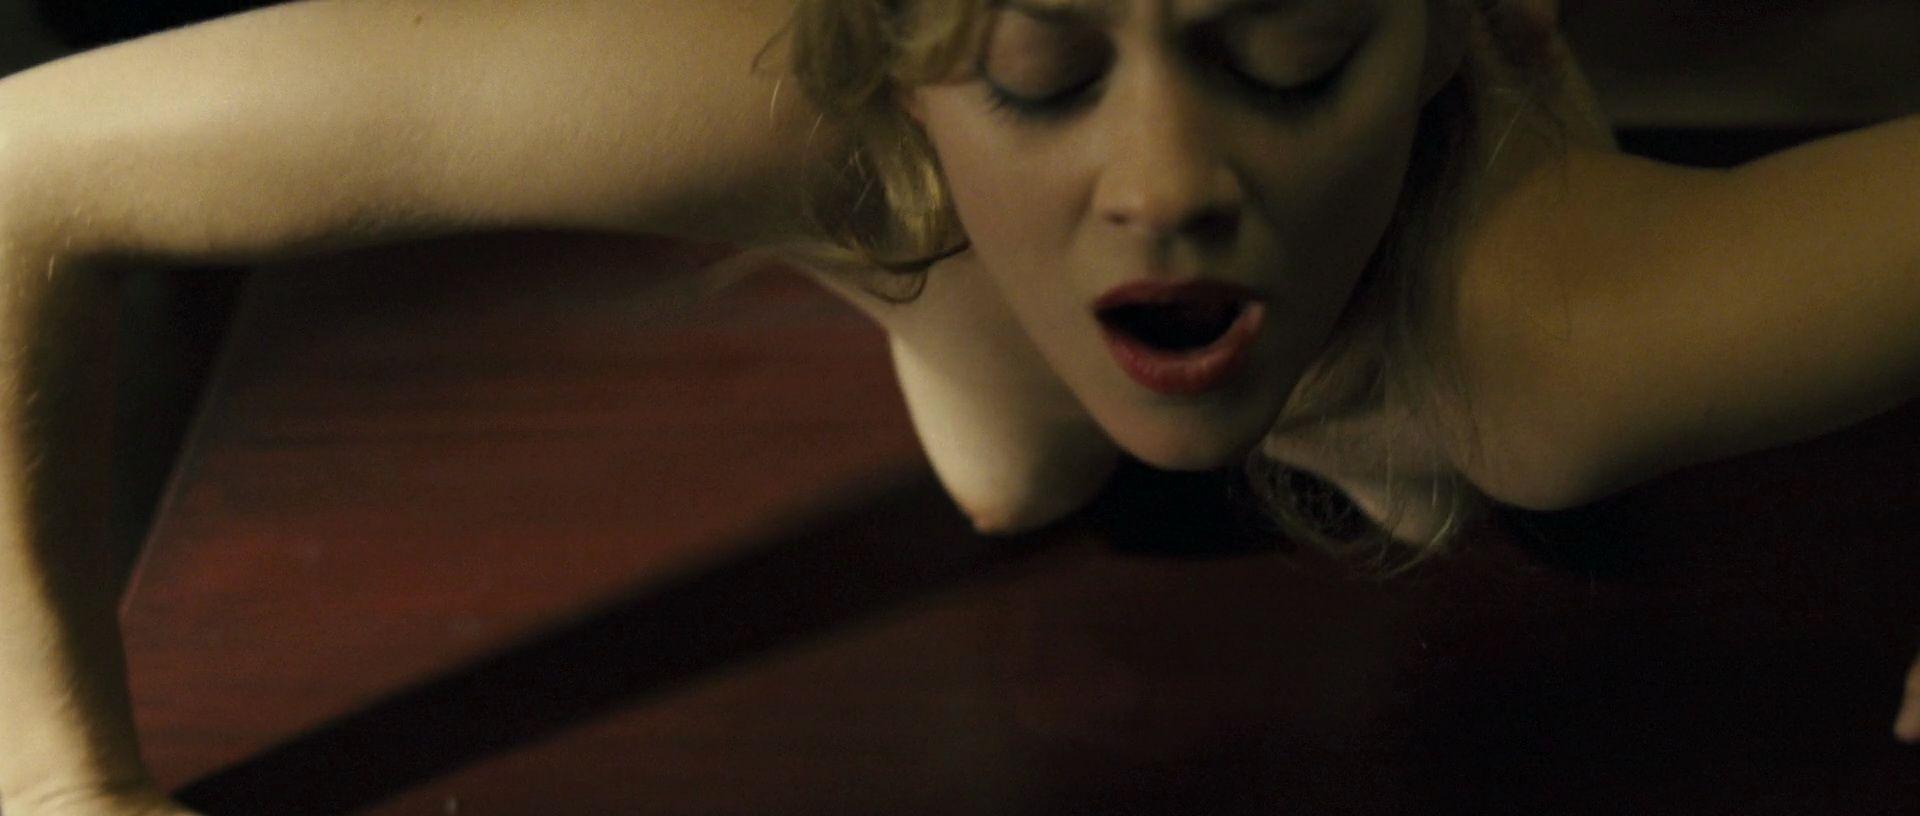 Stormy W. recomended scene sex marion cotillard